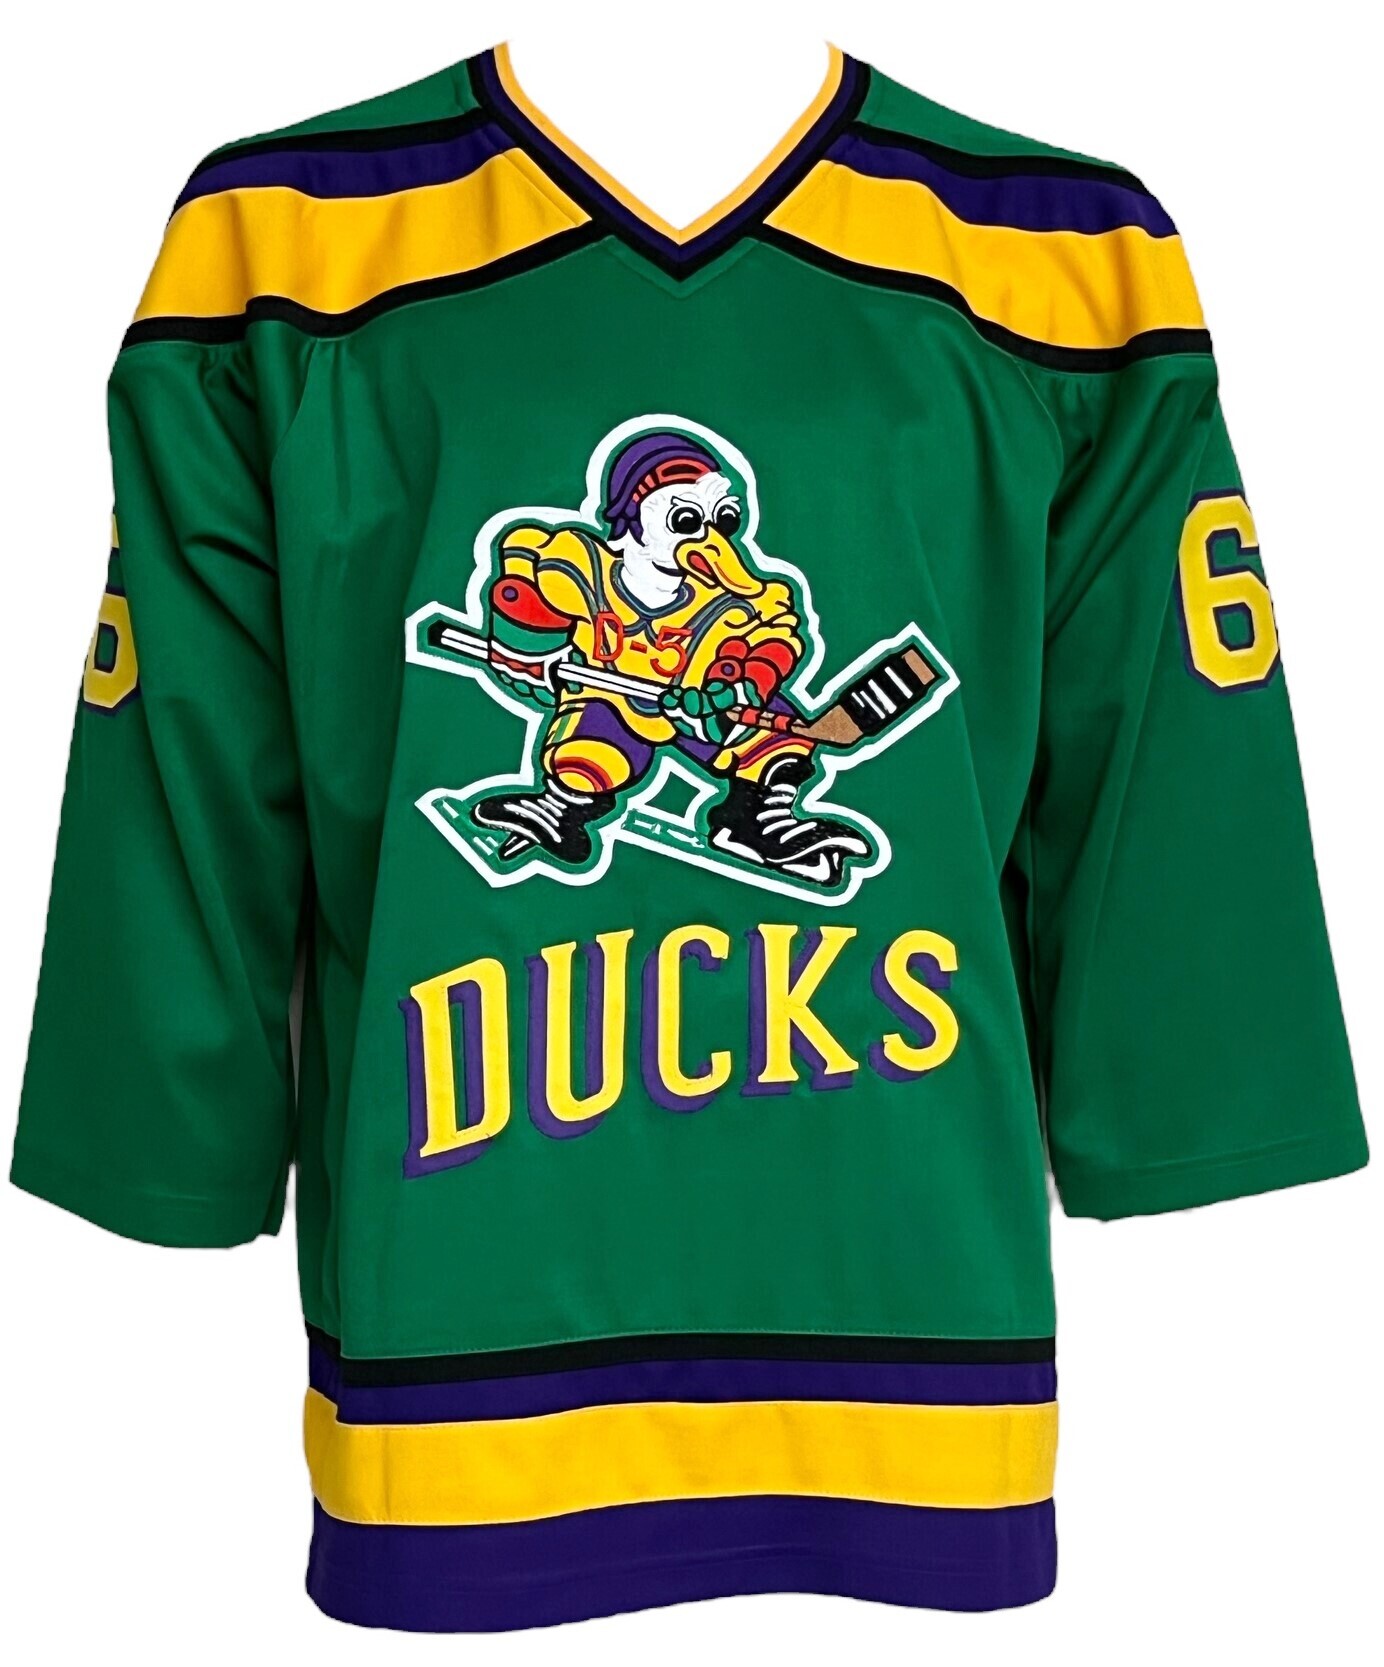 Mighty Ducks Movie Jerseys for sale in Baltimore, Maryland